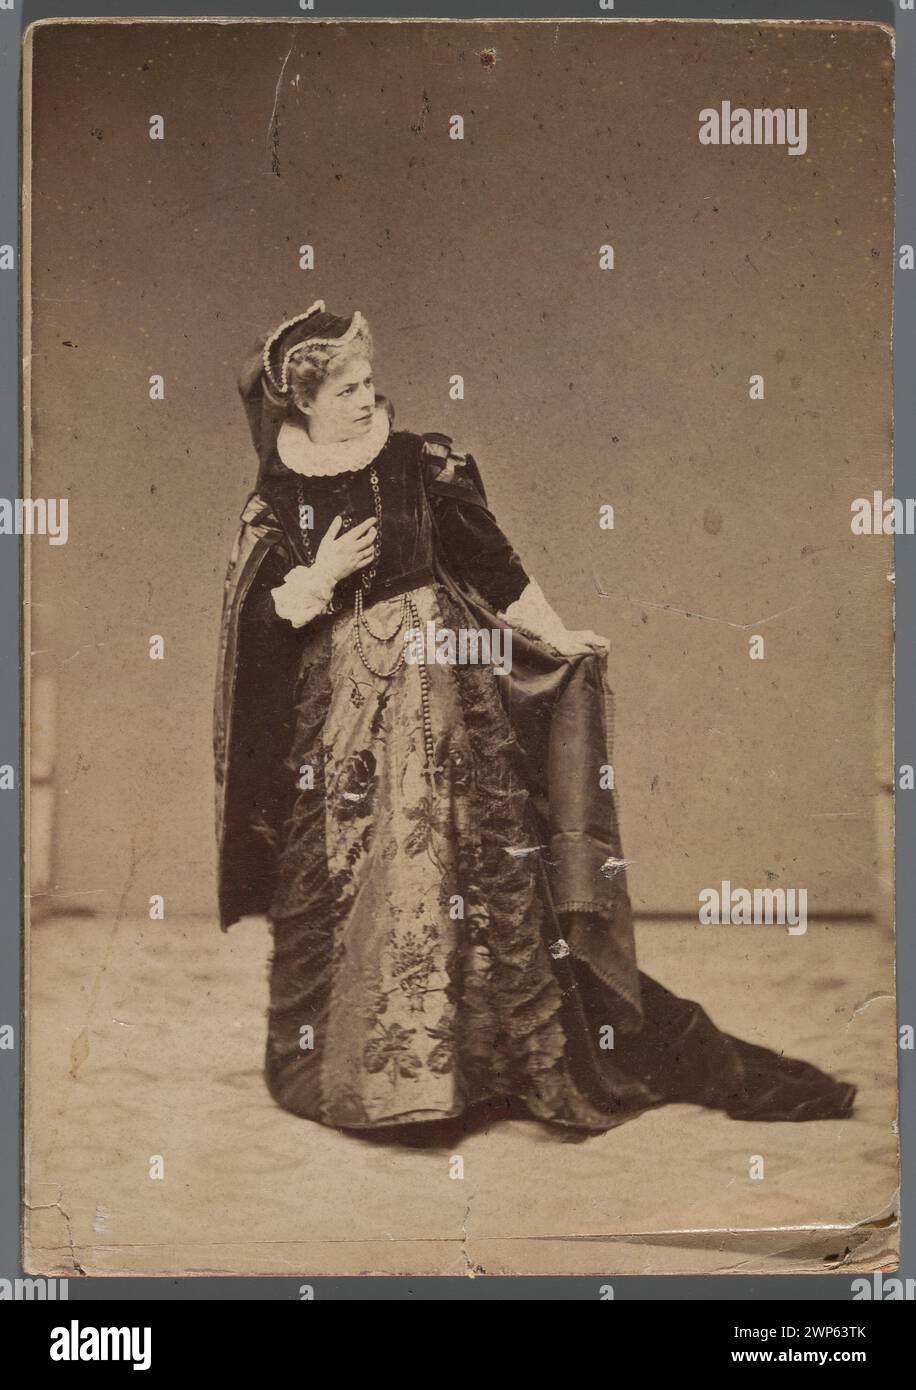 Portrait of Helena Modrzejewska (1840-1909) as a title in the tragedy of Friedrich Schiller 'Maria Stuart' (premiere at the Grand Theater in Warsaw on October 21, 1868) (watched the whole character); Mieczkowski, Jan (1830-1889); around 1868 (1868-00-00-1875-00-00);Modrzejewska, Helena (1840-1909), Modrzejewska, Helena (1840-1909)-iconography, Rajchman, Aleksander (1855-1915)-collection, Schiller, Friedrich (1759-1805). Maria Stuart, actors, theater costumes, portraits, women's portraits, theater (artist) Stock Photo